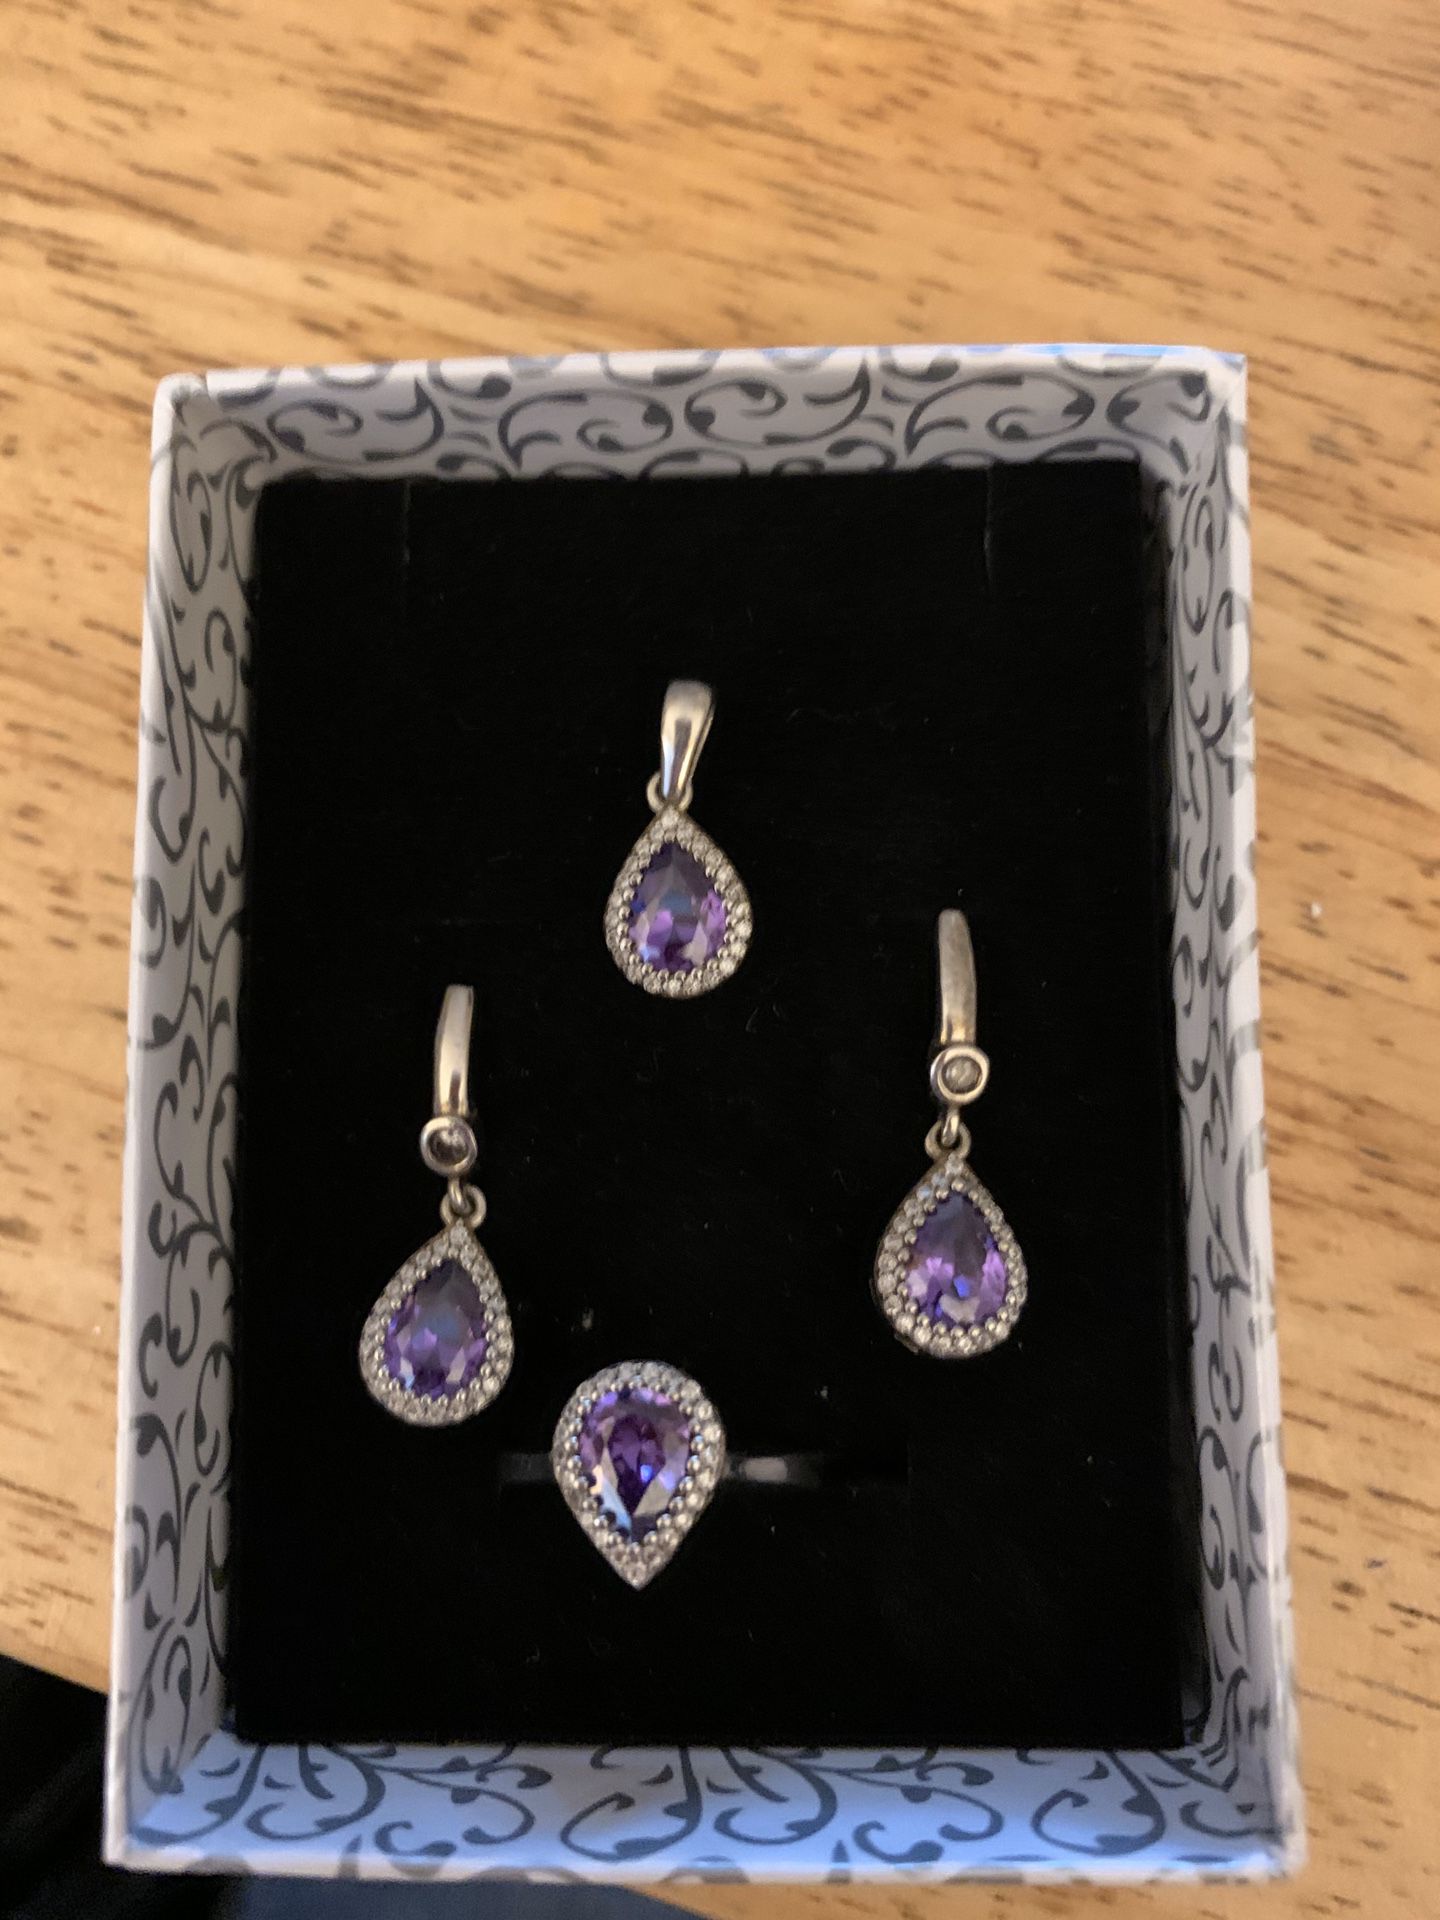 Amethyst earrings, ring, and pendent